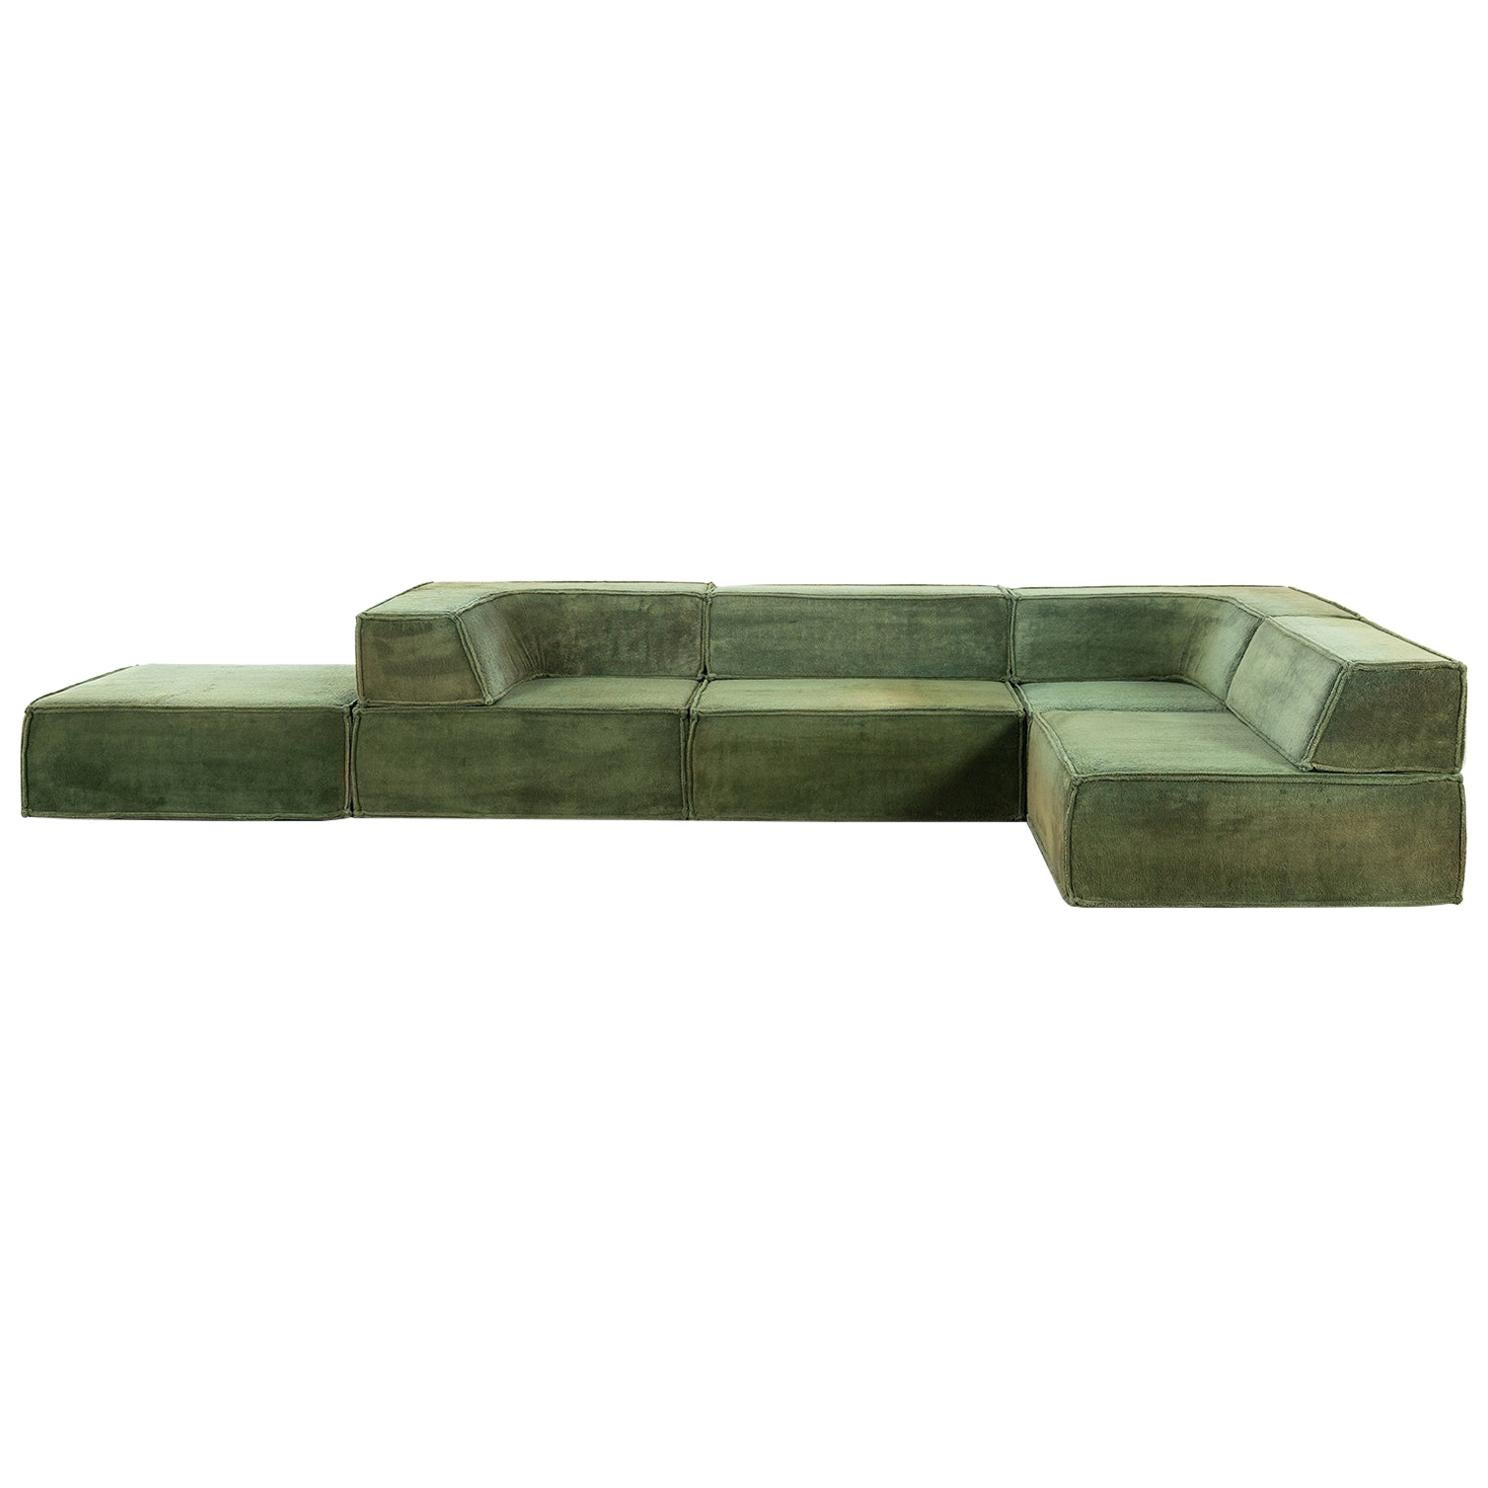 COR Trio Modular Sofa, Giant Landscape in Green, 1972 by Team Form AG, Swiss